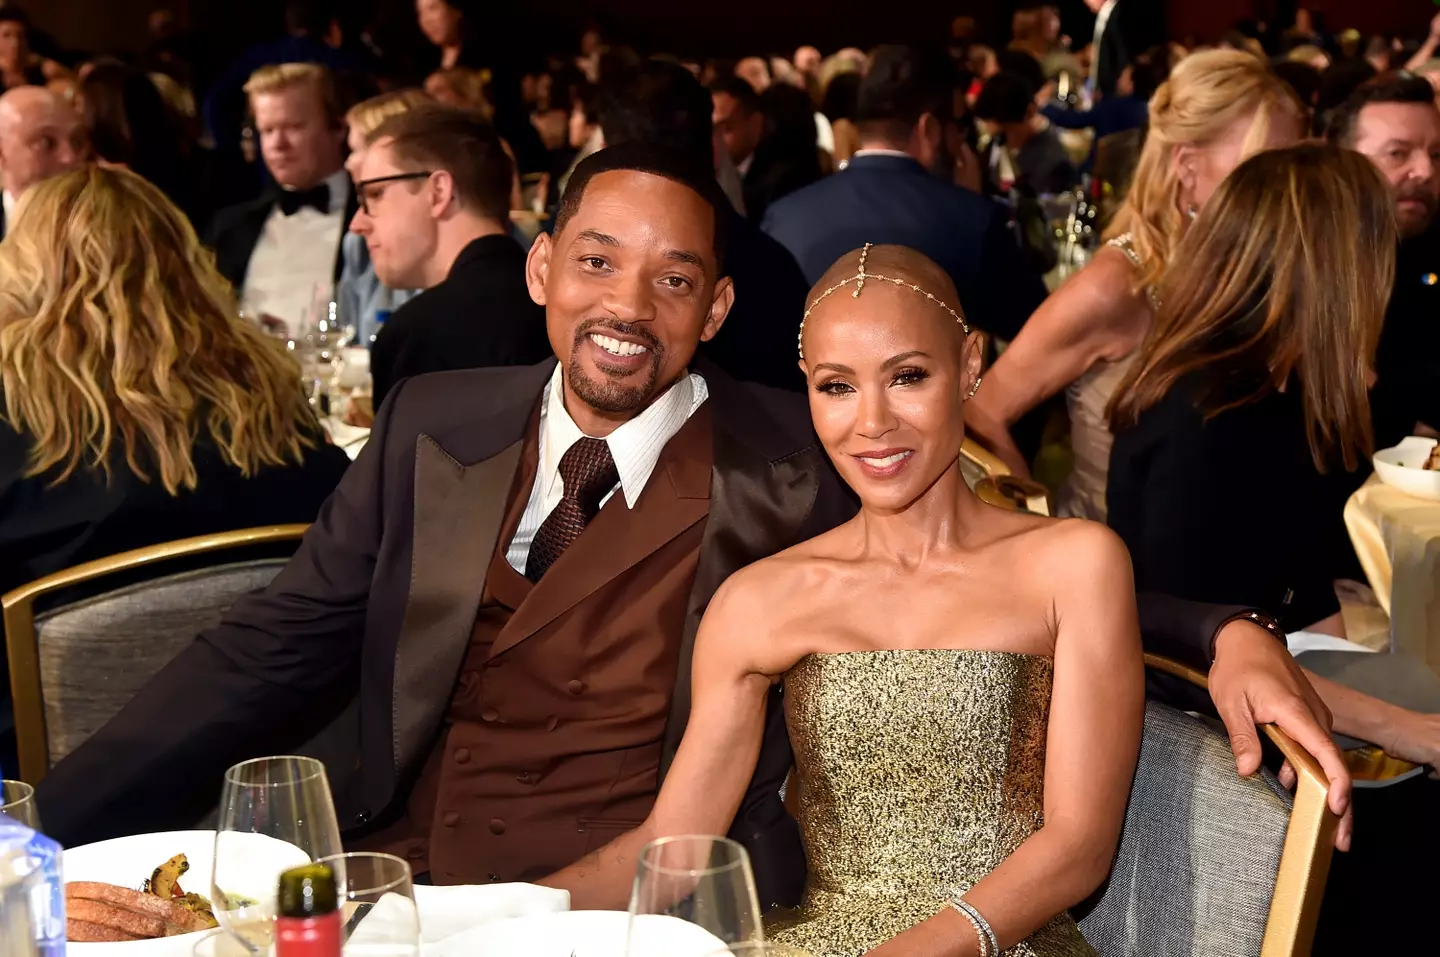 Jada Pinkett Smith revealed she and husband Will have been separated for the last seven years.